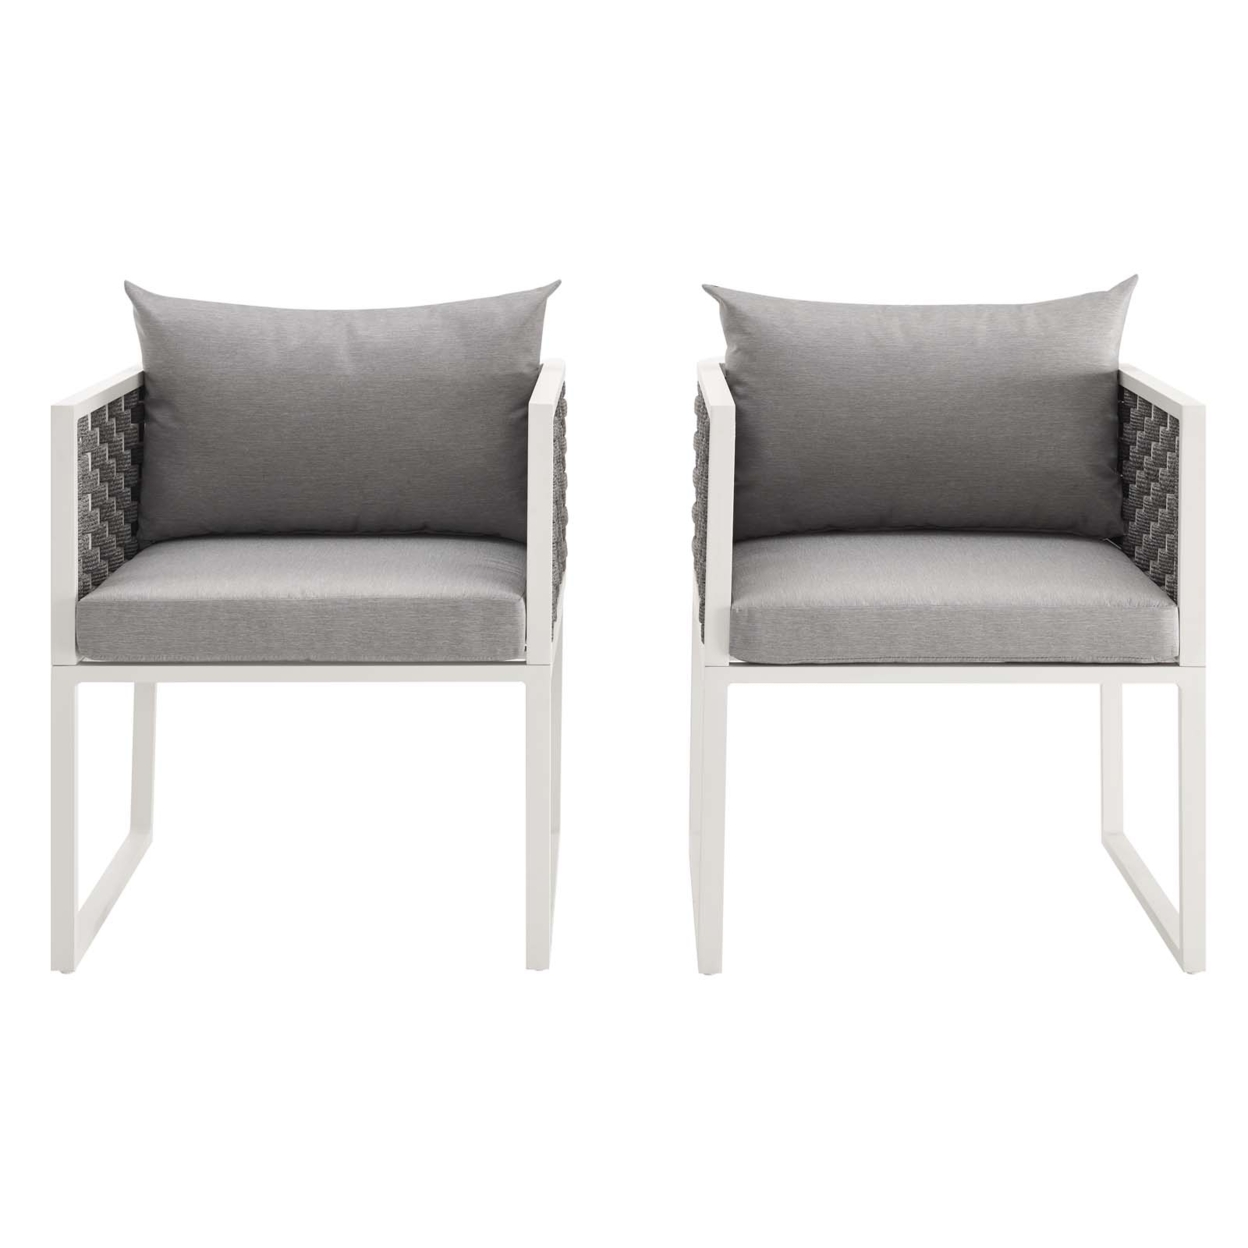 Stance Dining Armchair Outdoor Patio Aluminum Set Of 2, White Gray